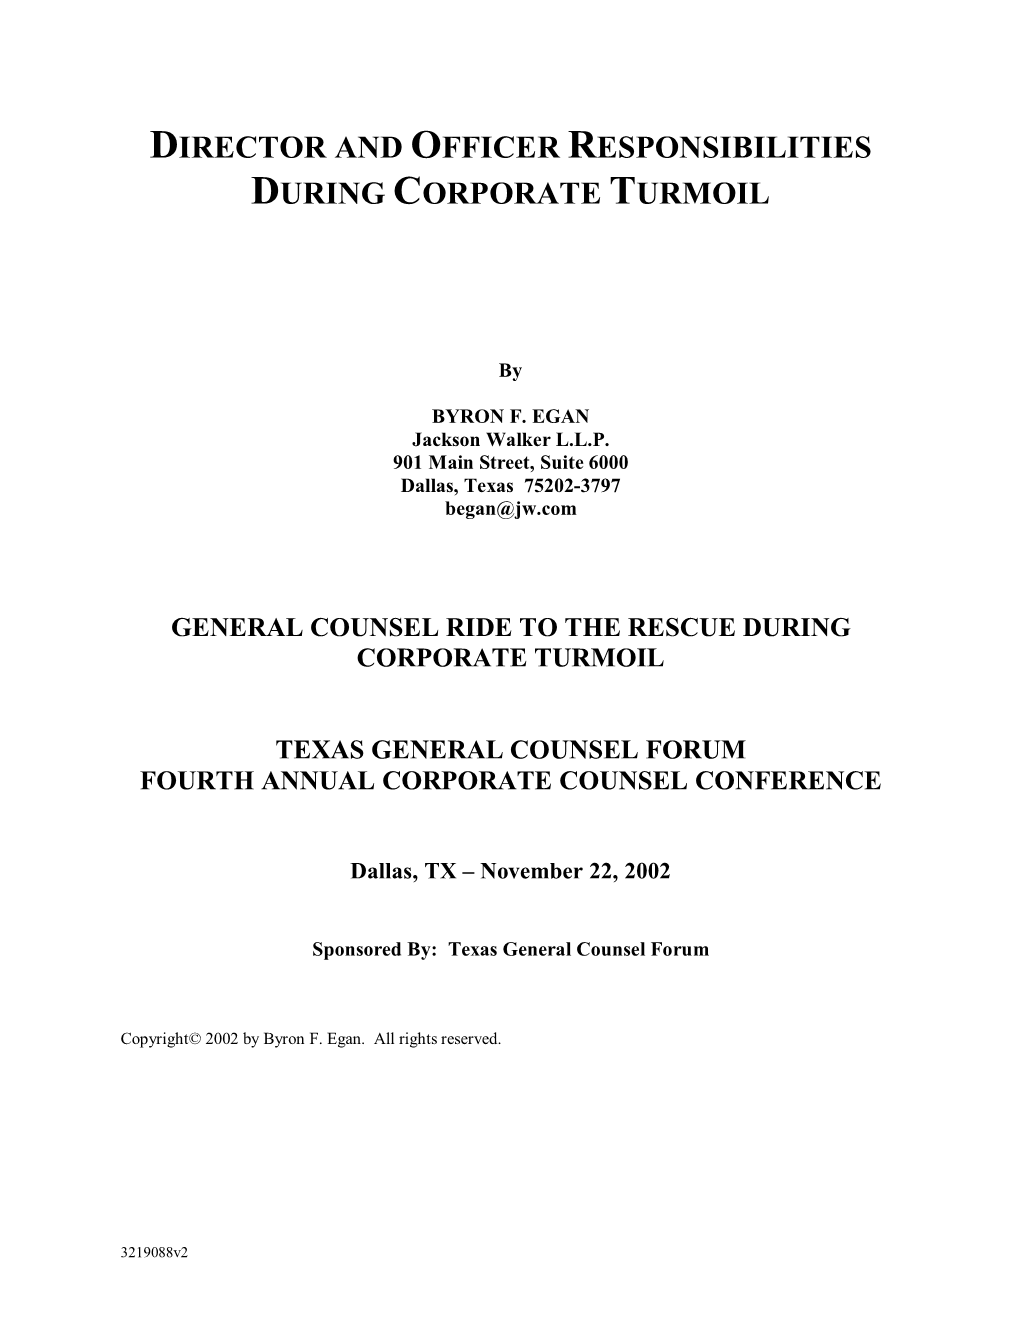 Director and Officer Responsibilities During Corporate Turmoil